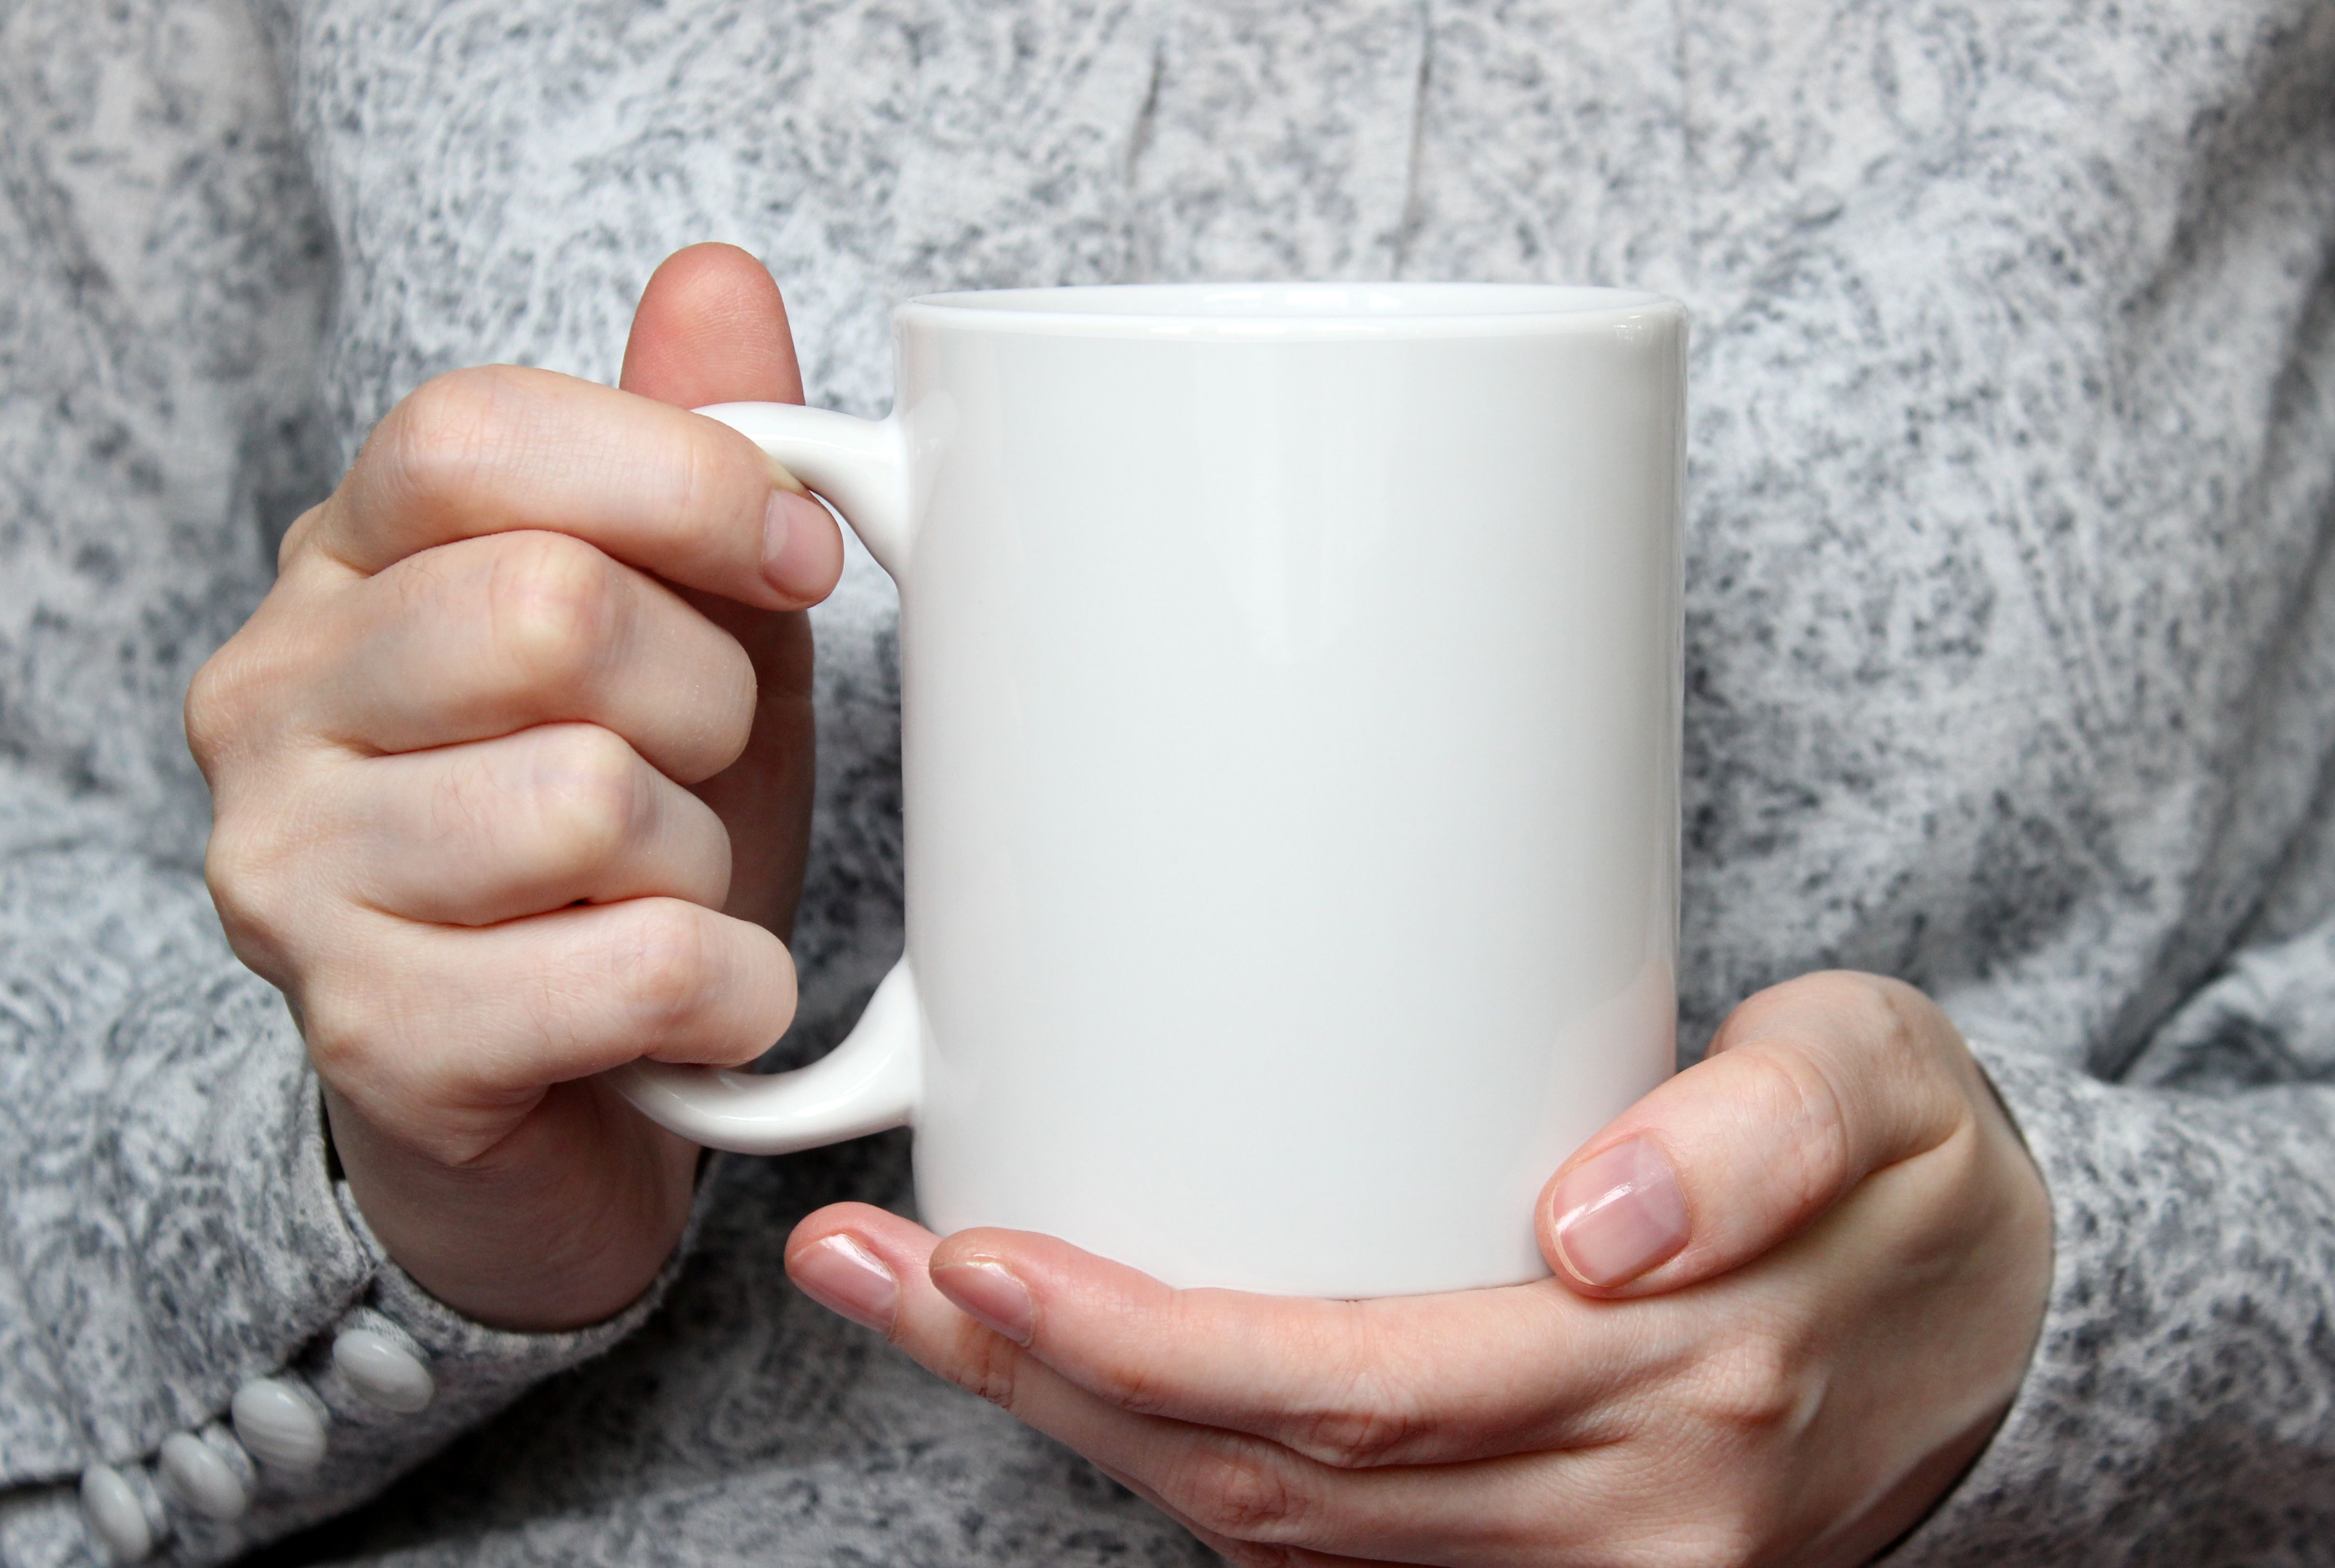 Girl holding white cup in hands. White mug in woman's hands.